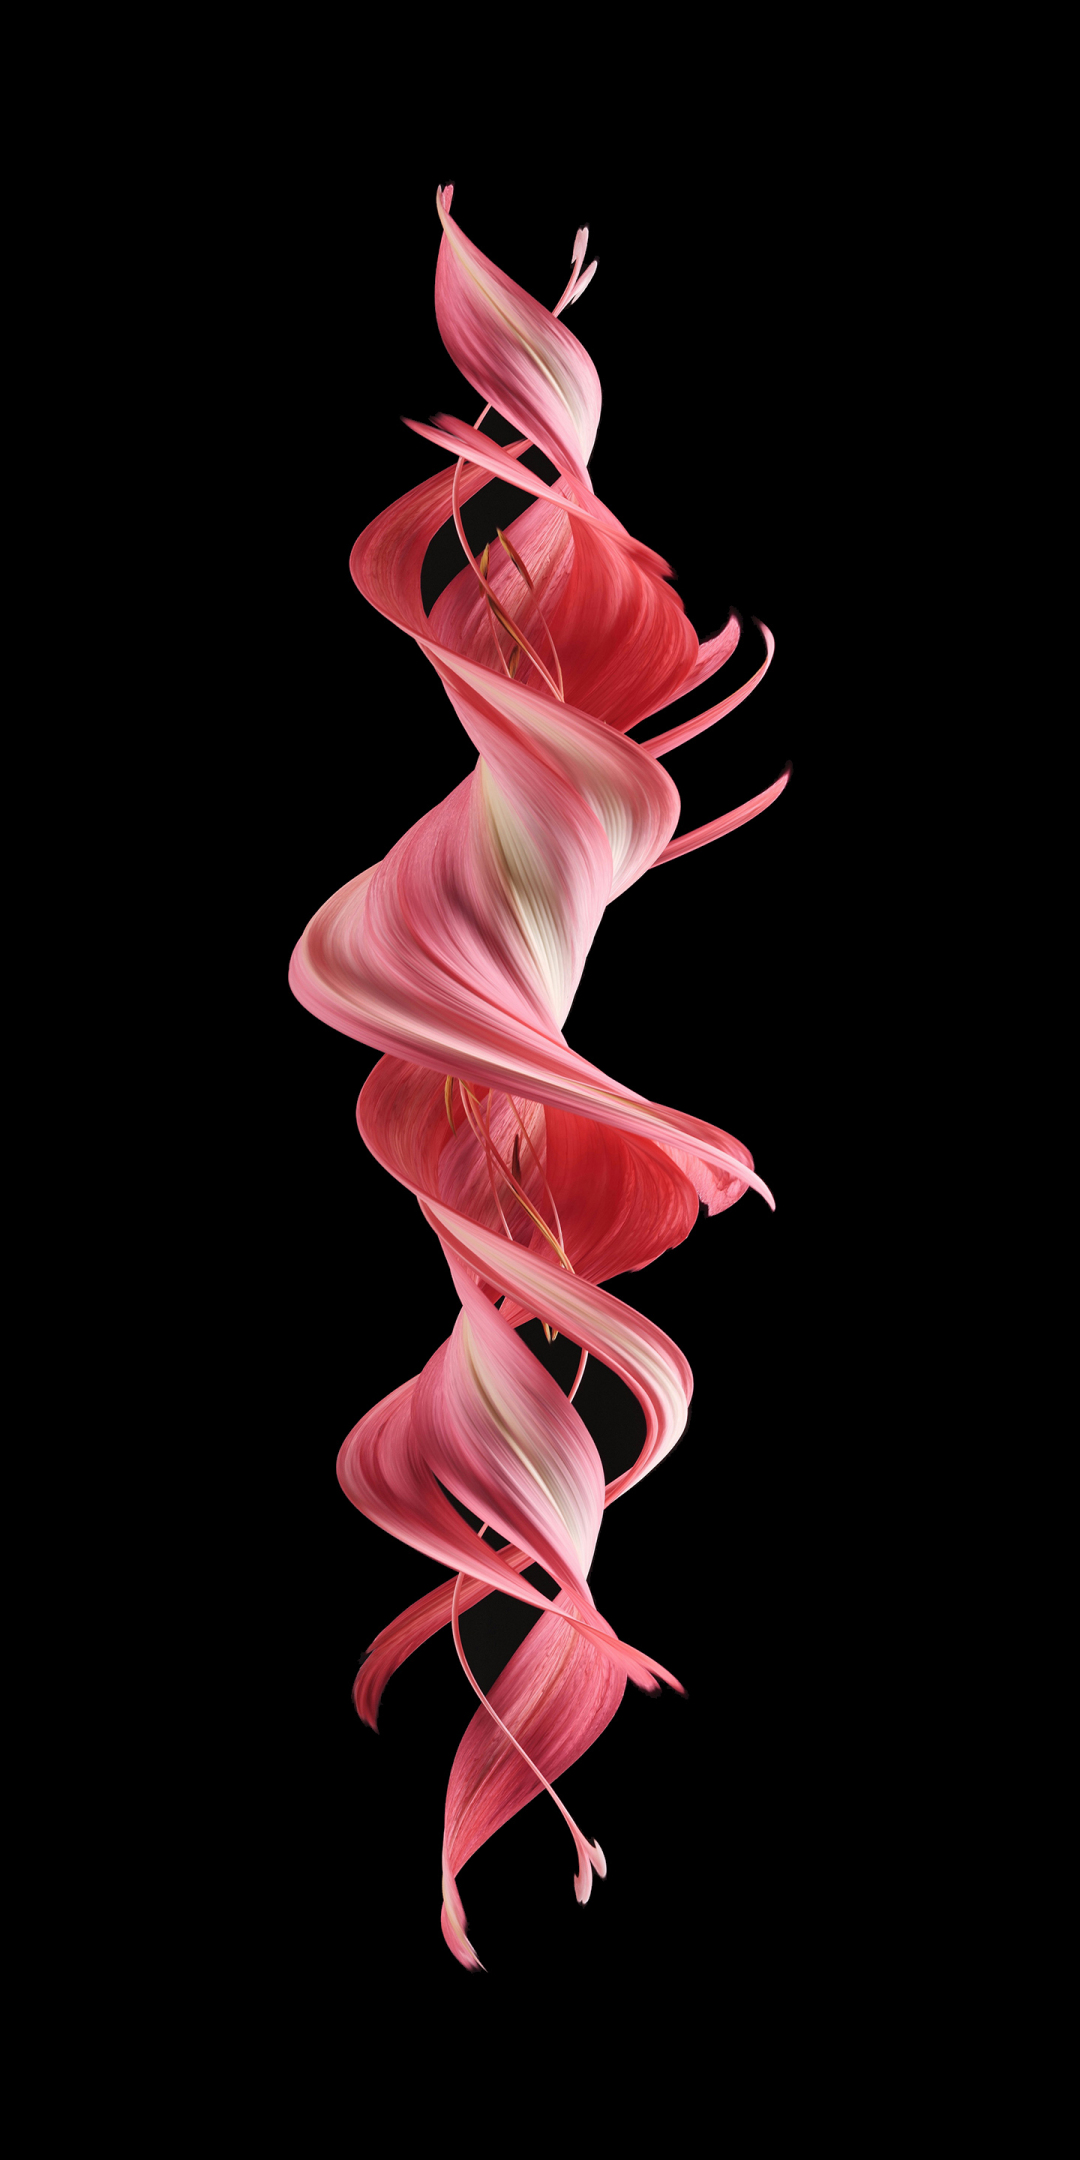 A red and white swirl, minimal and twisted, abstract, 1080x2160 wallpaper